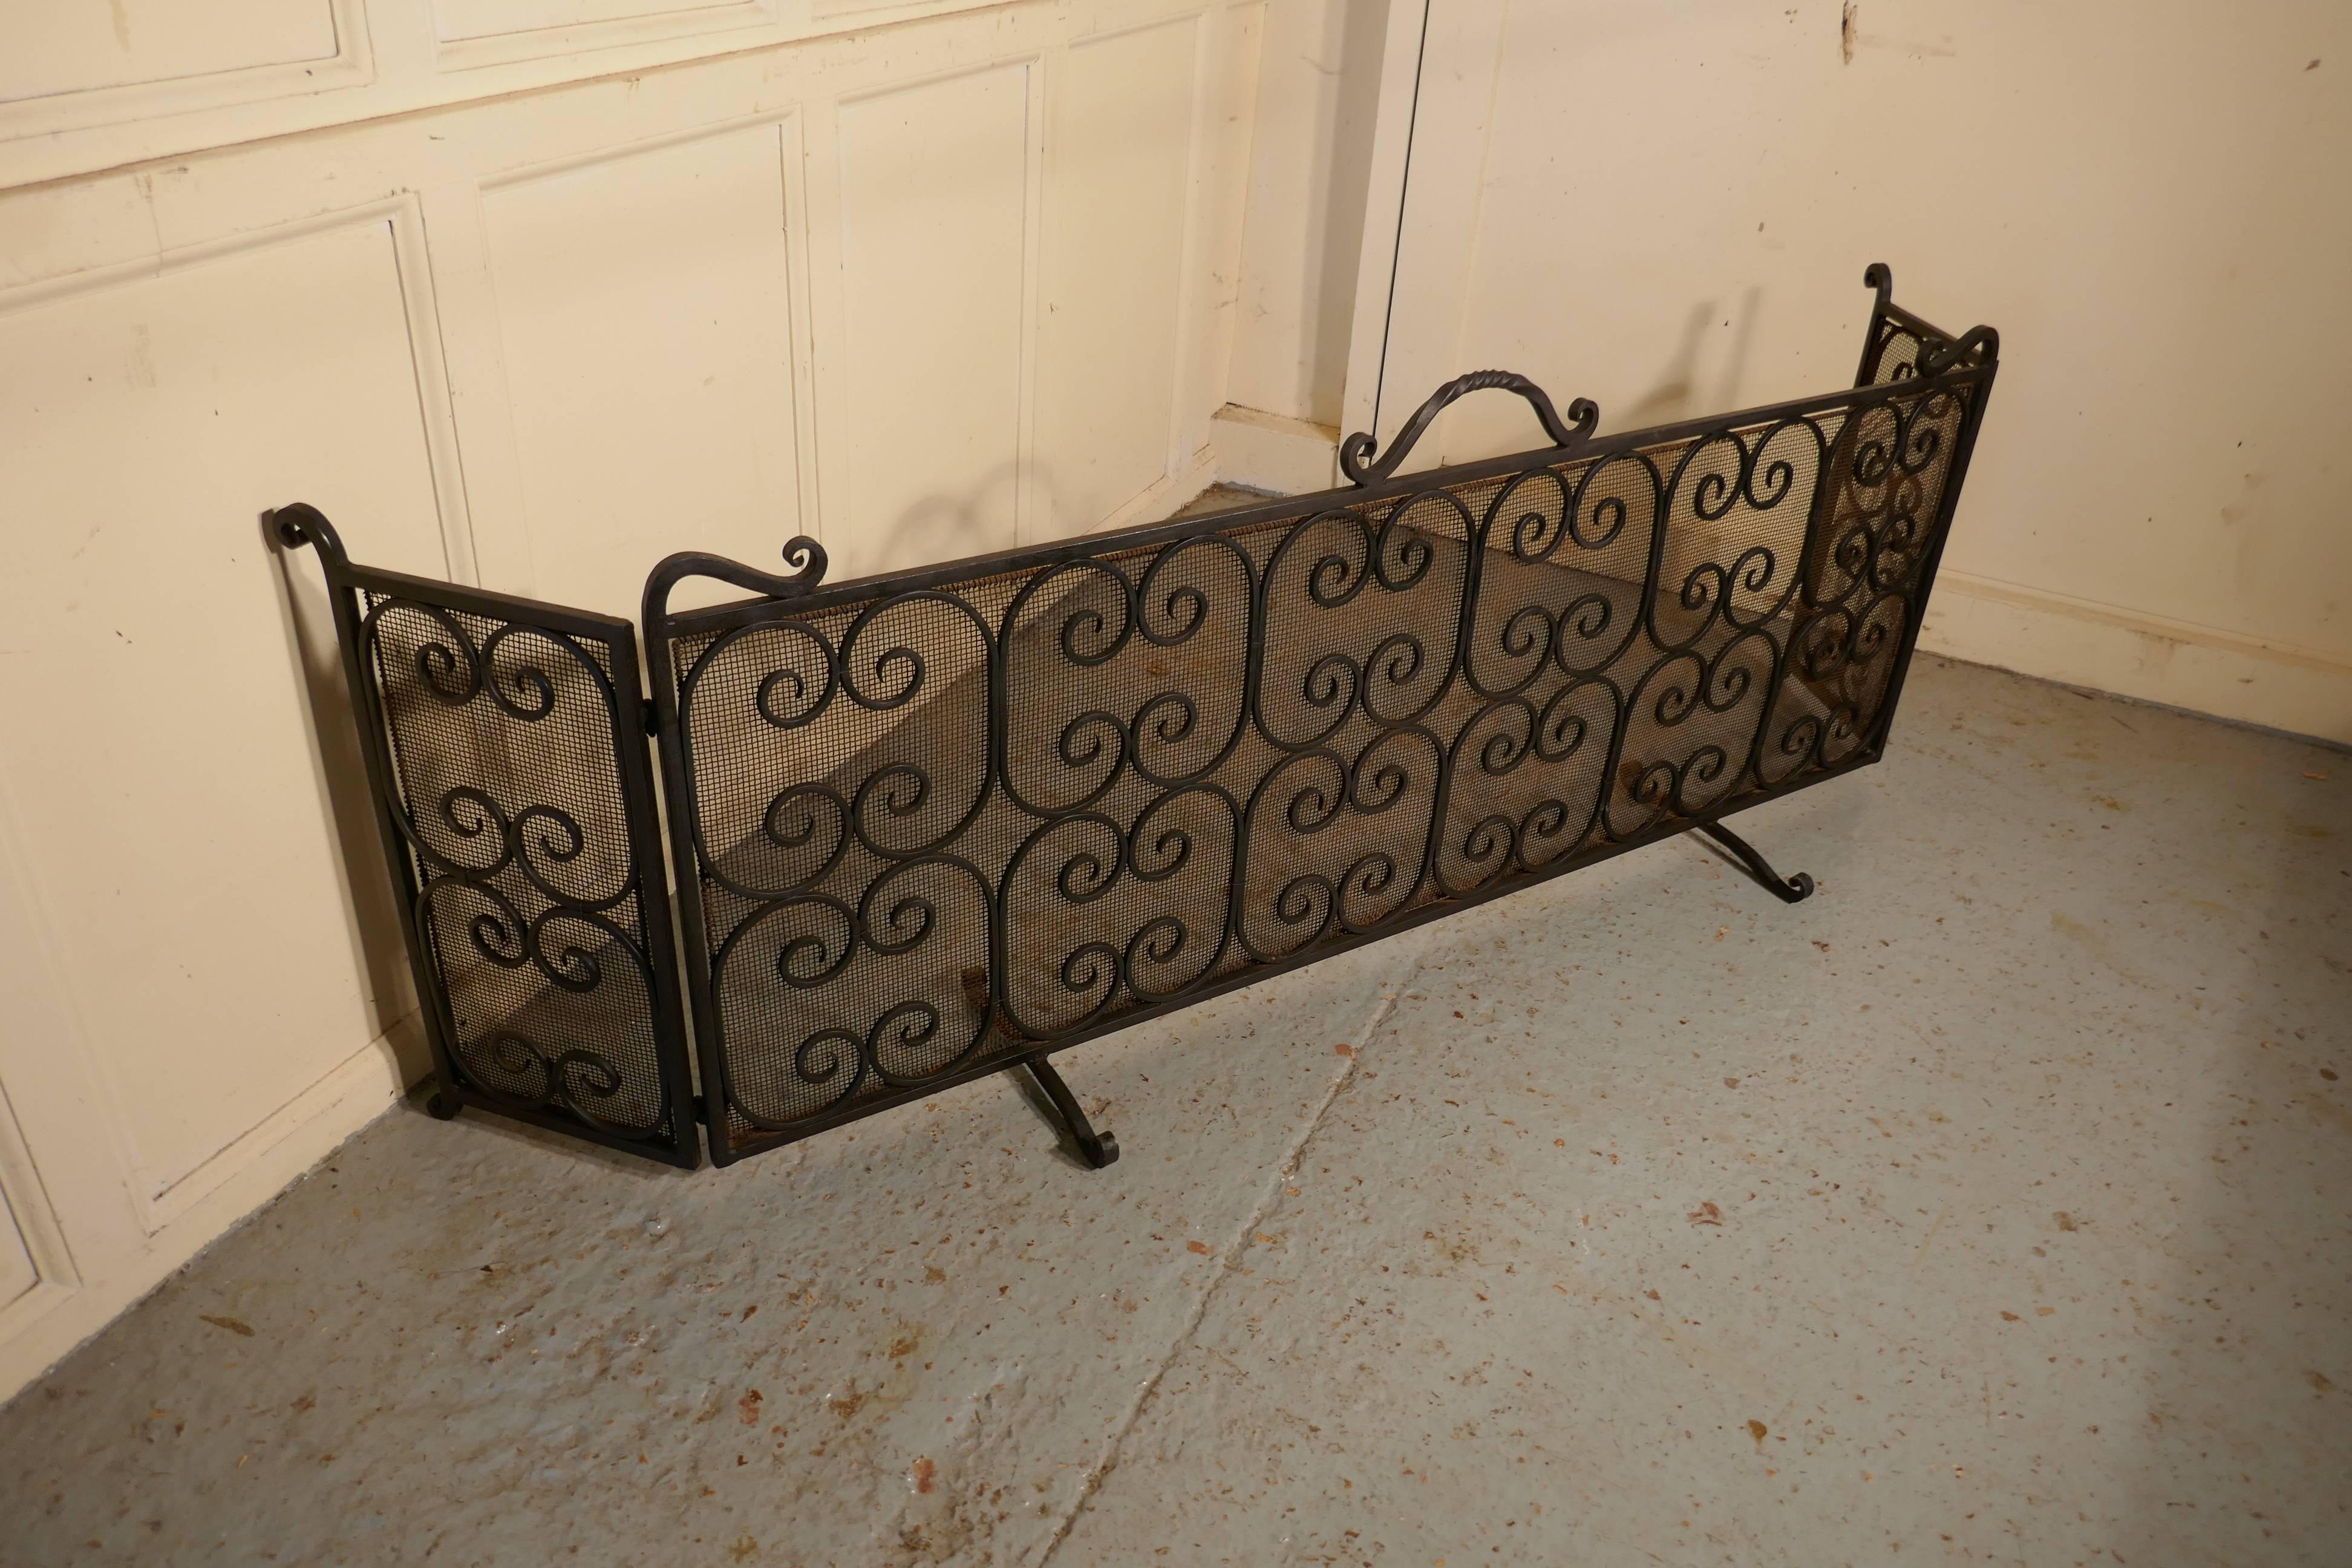 Unusual large folding wrought iron fire guard for Inglenook Fireplace

This is an unusually large fireguard, it has been specially made for a traditional Inglenook fireplace as it will completely surround the fire. The guard has an iron frame with